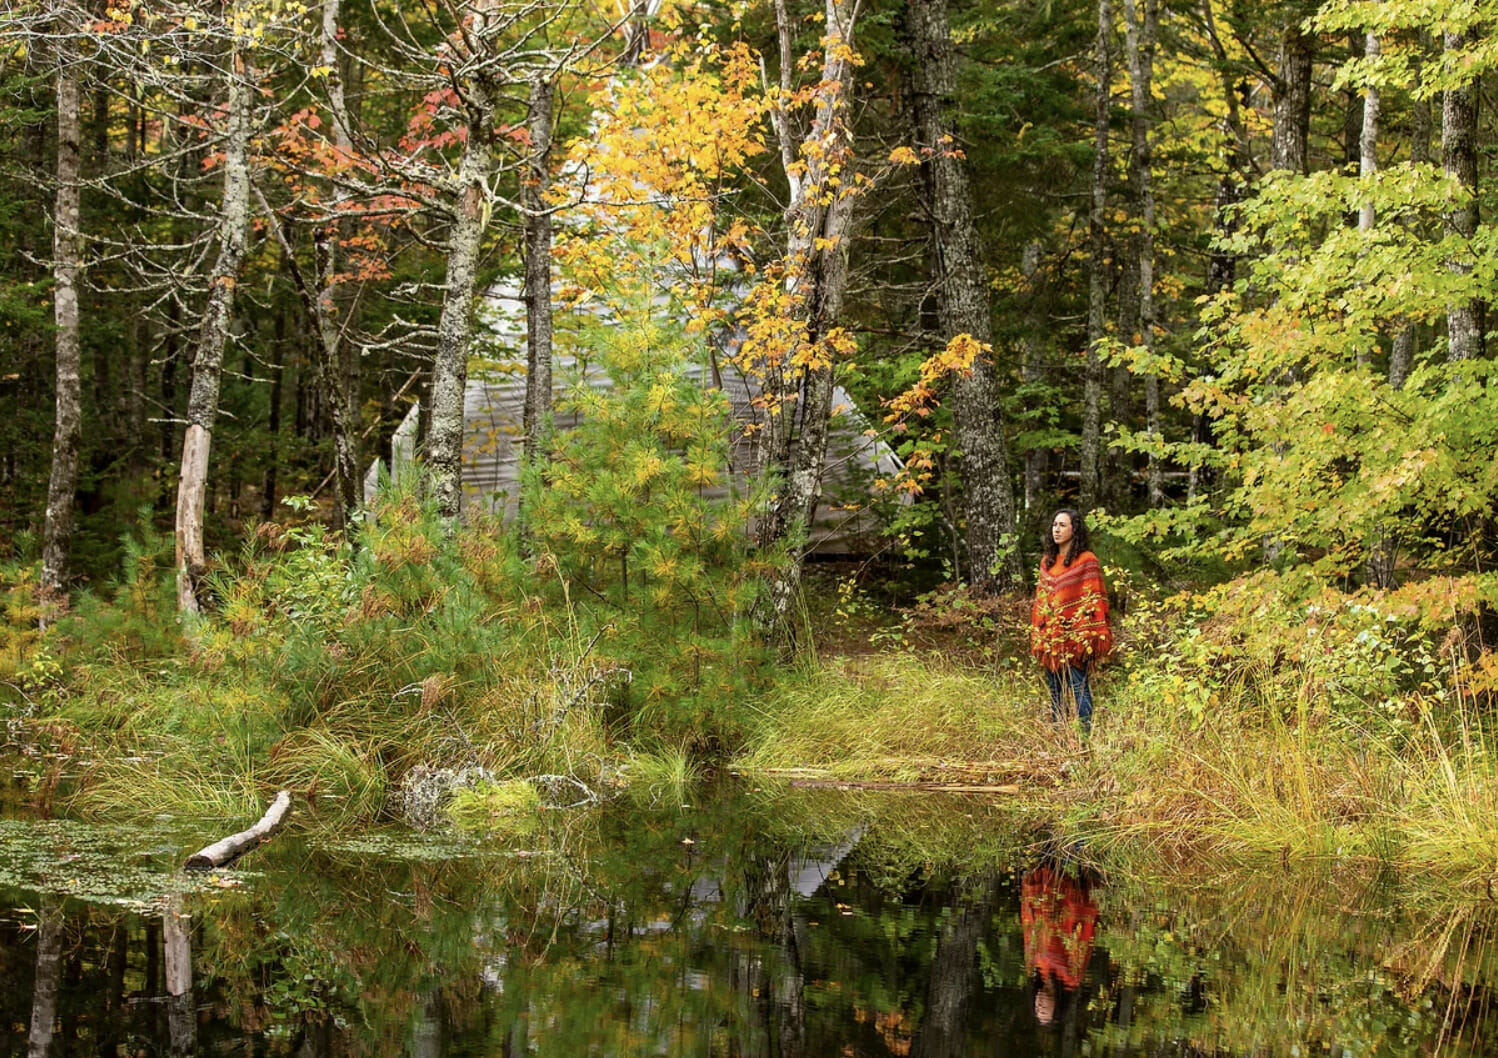 Photo of shalan joudry standing next to a pool of glimmering water, looking out into the distance. Behind her are tall green pine and other trees. She is wearing a red knitted poncho.